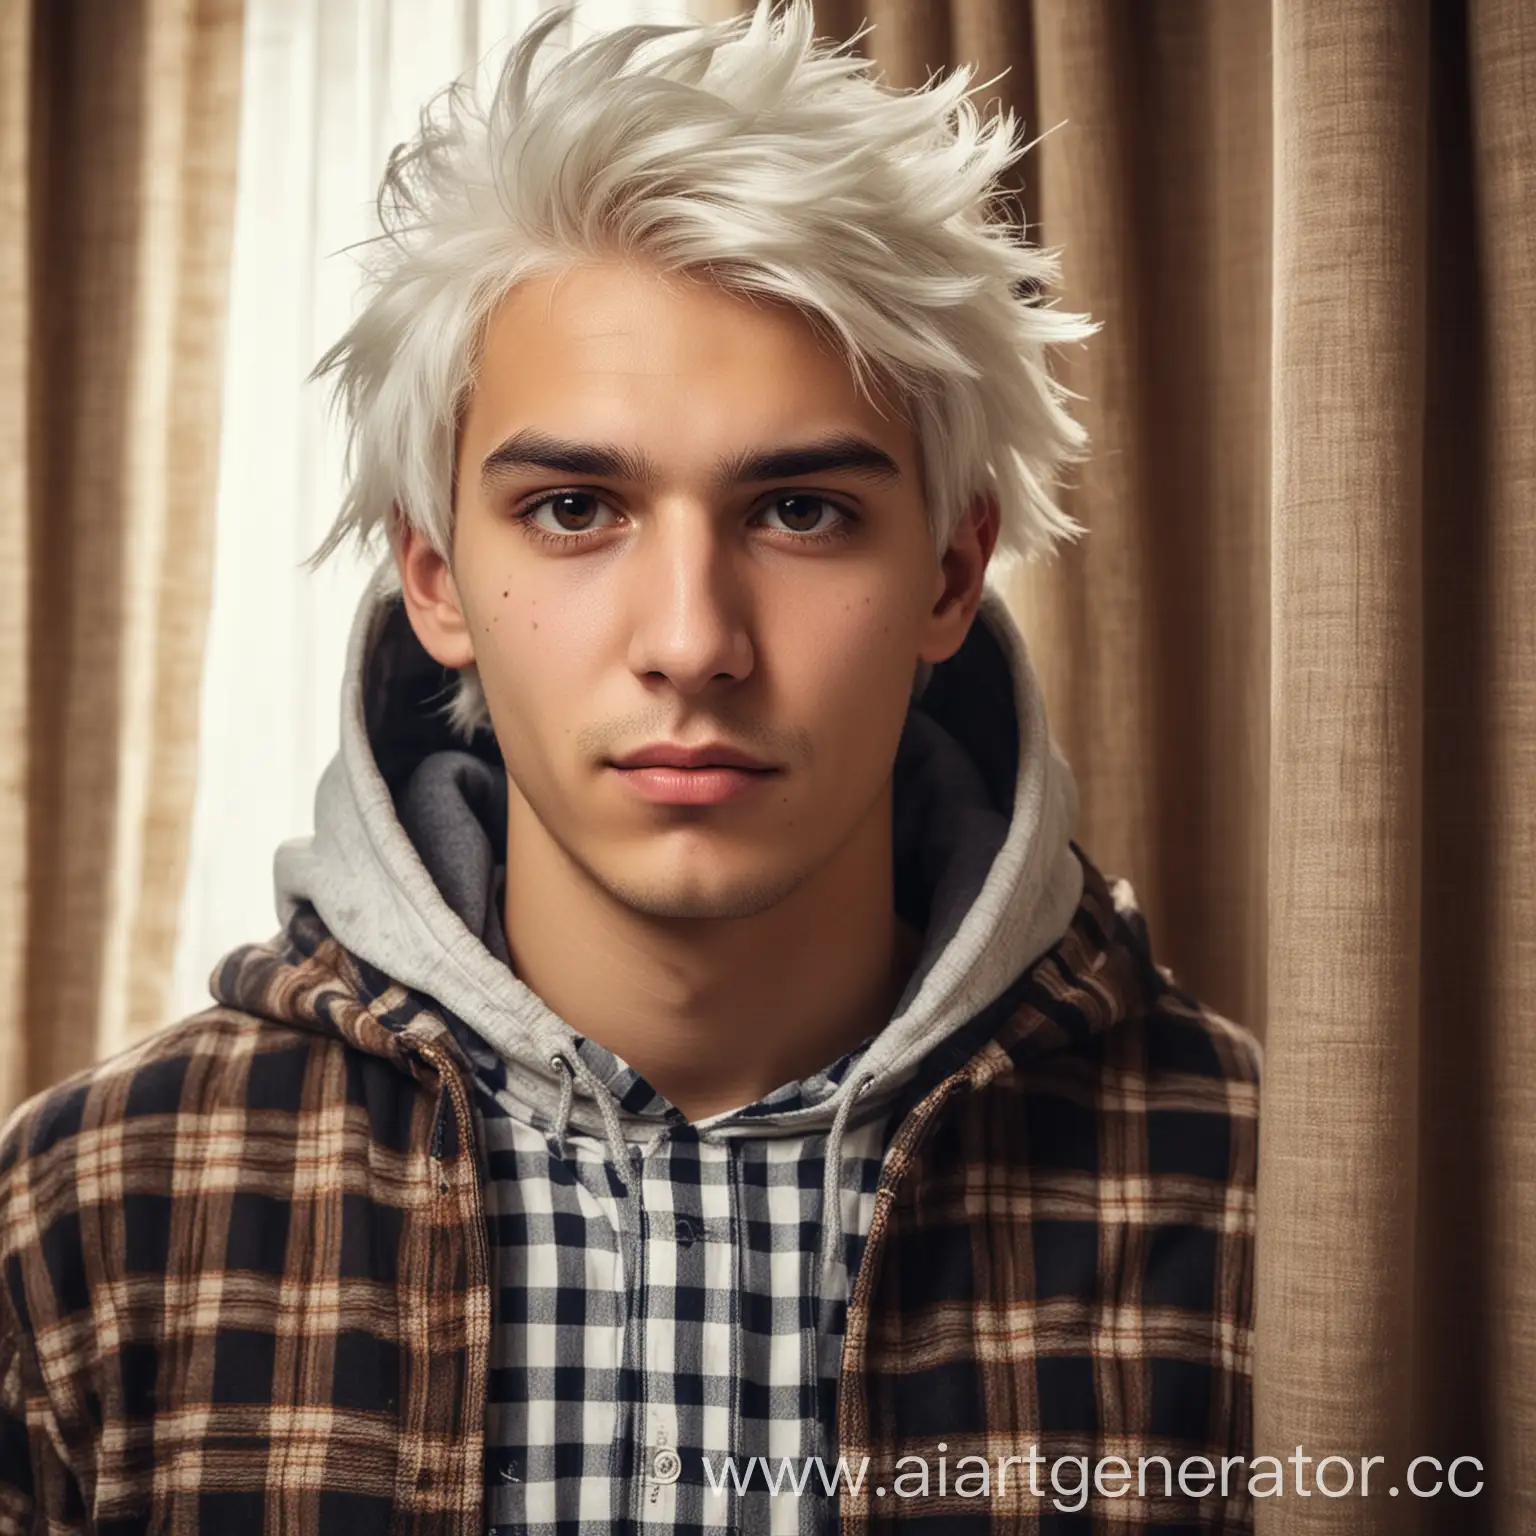 Portrait-of-a-Young-Man-with-White-Hair-and-Checkered-Shirt